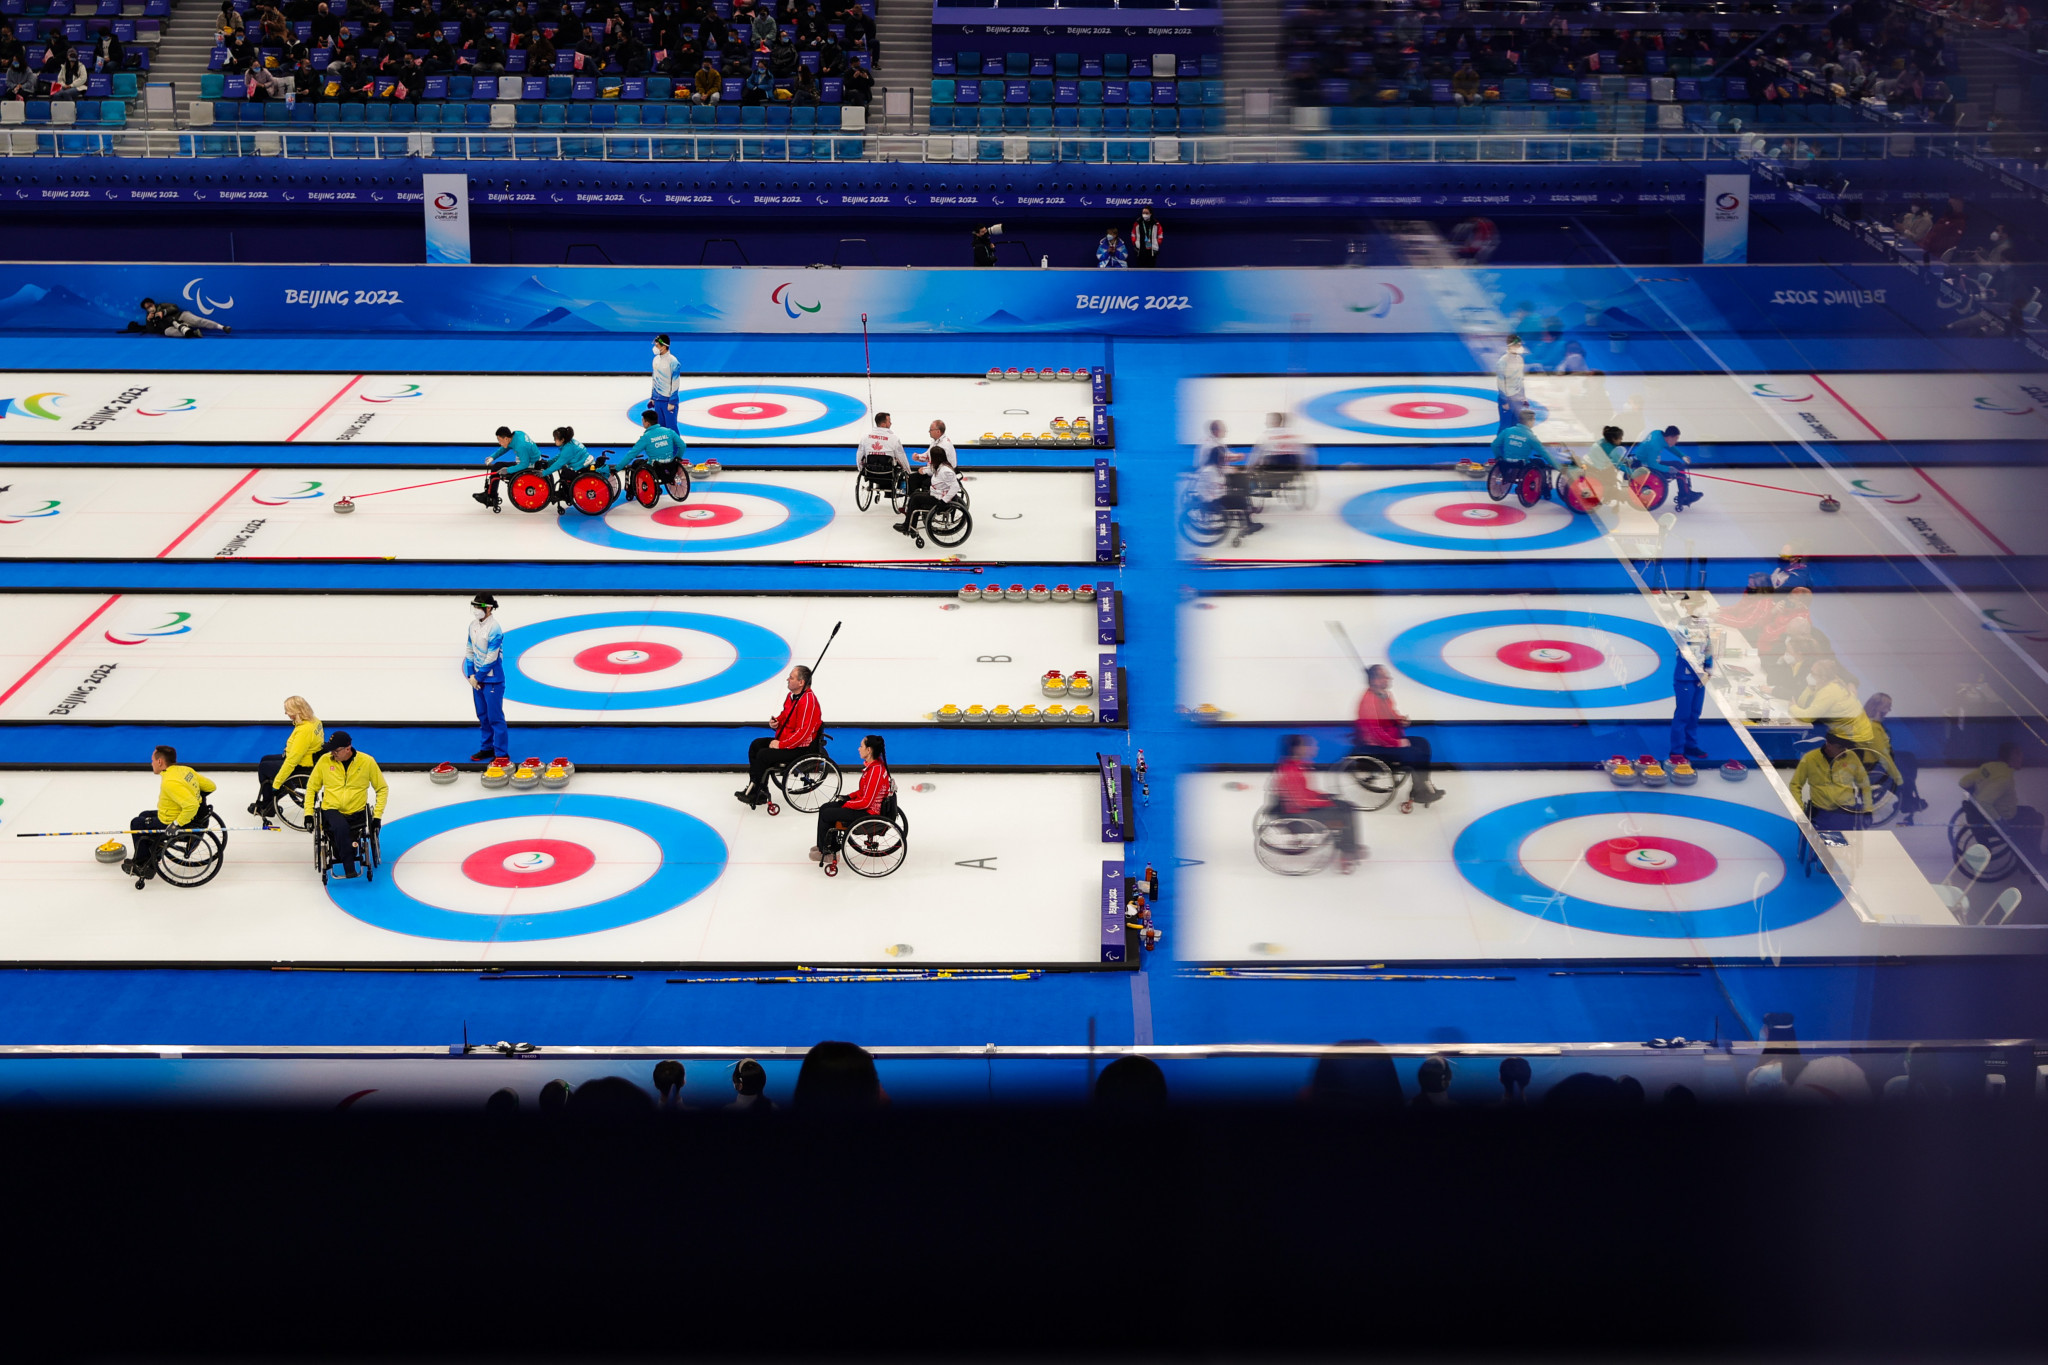 Curling will continue at 2030 and 2034 Winter Games. GETTY IMAGES